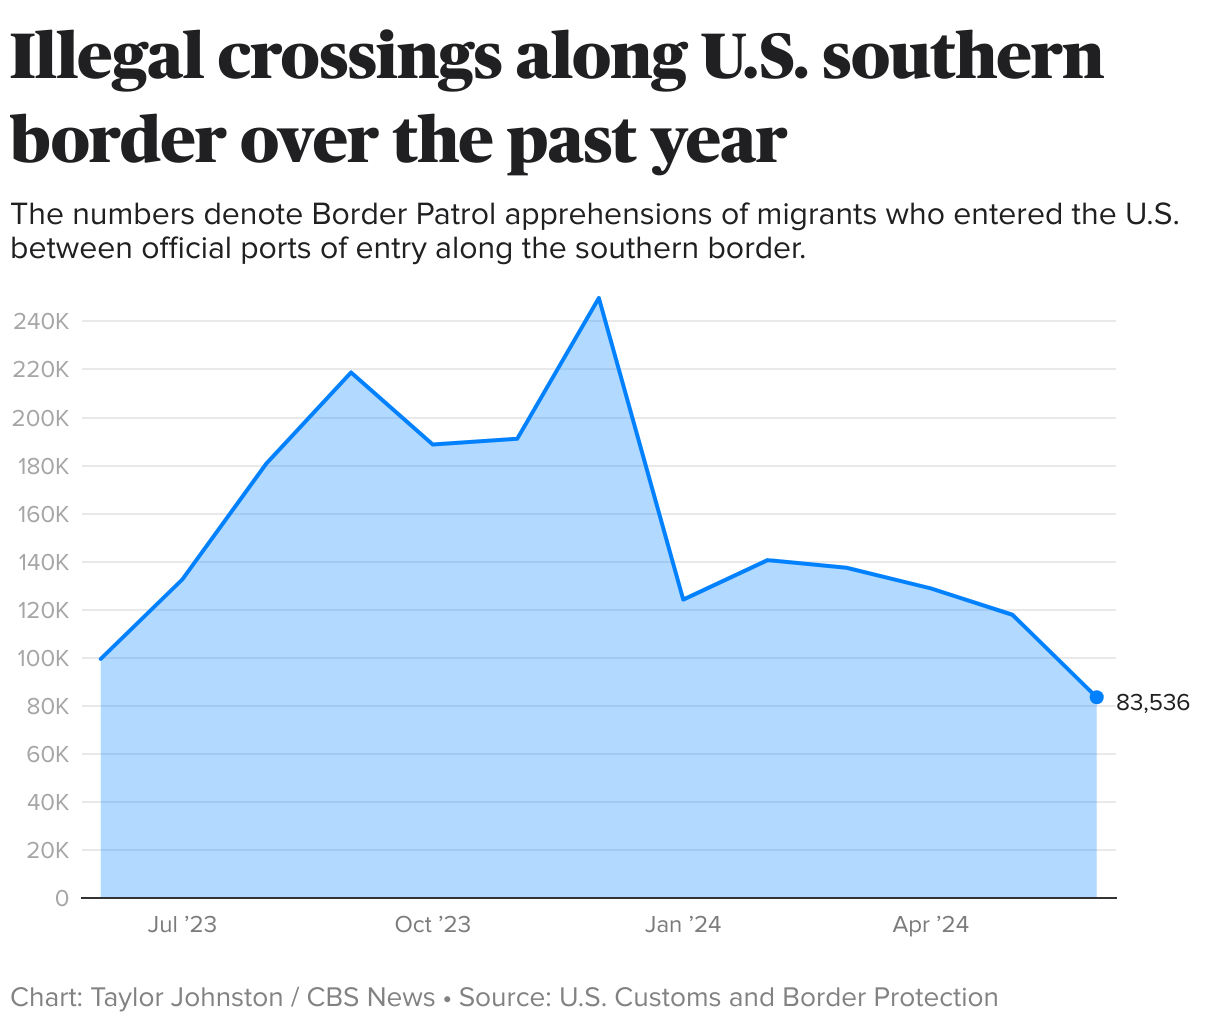 Line chart showing the number of illegal crossings along the southern border in the past year.